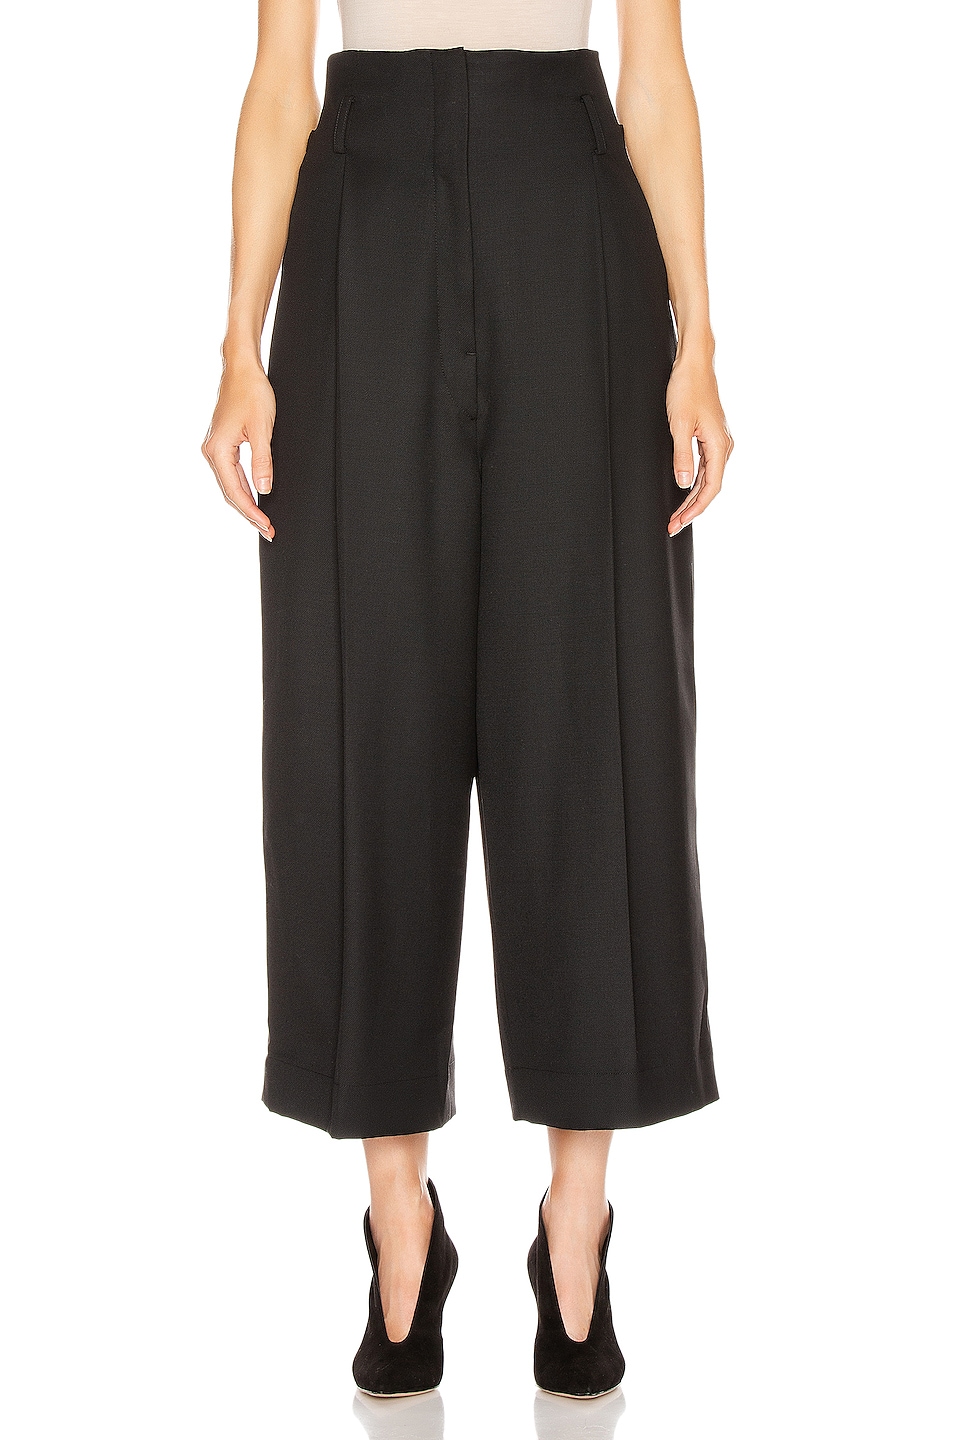 Lemaire High Waisted Tailored Pant in Black | FWRD